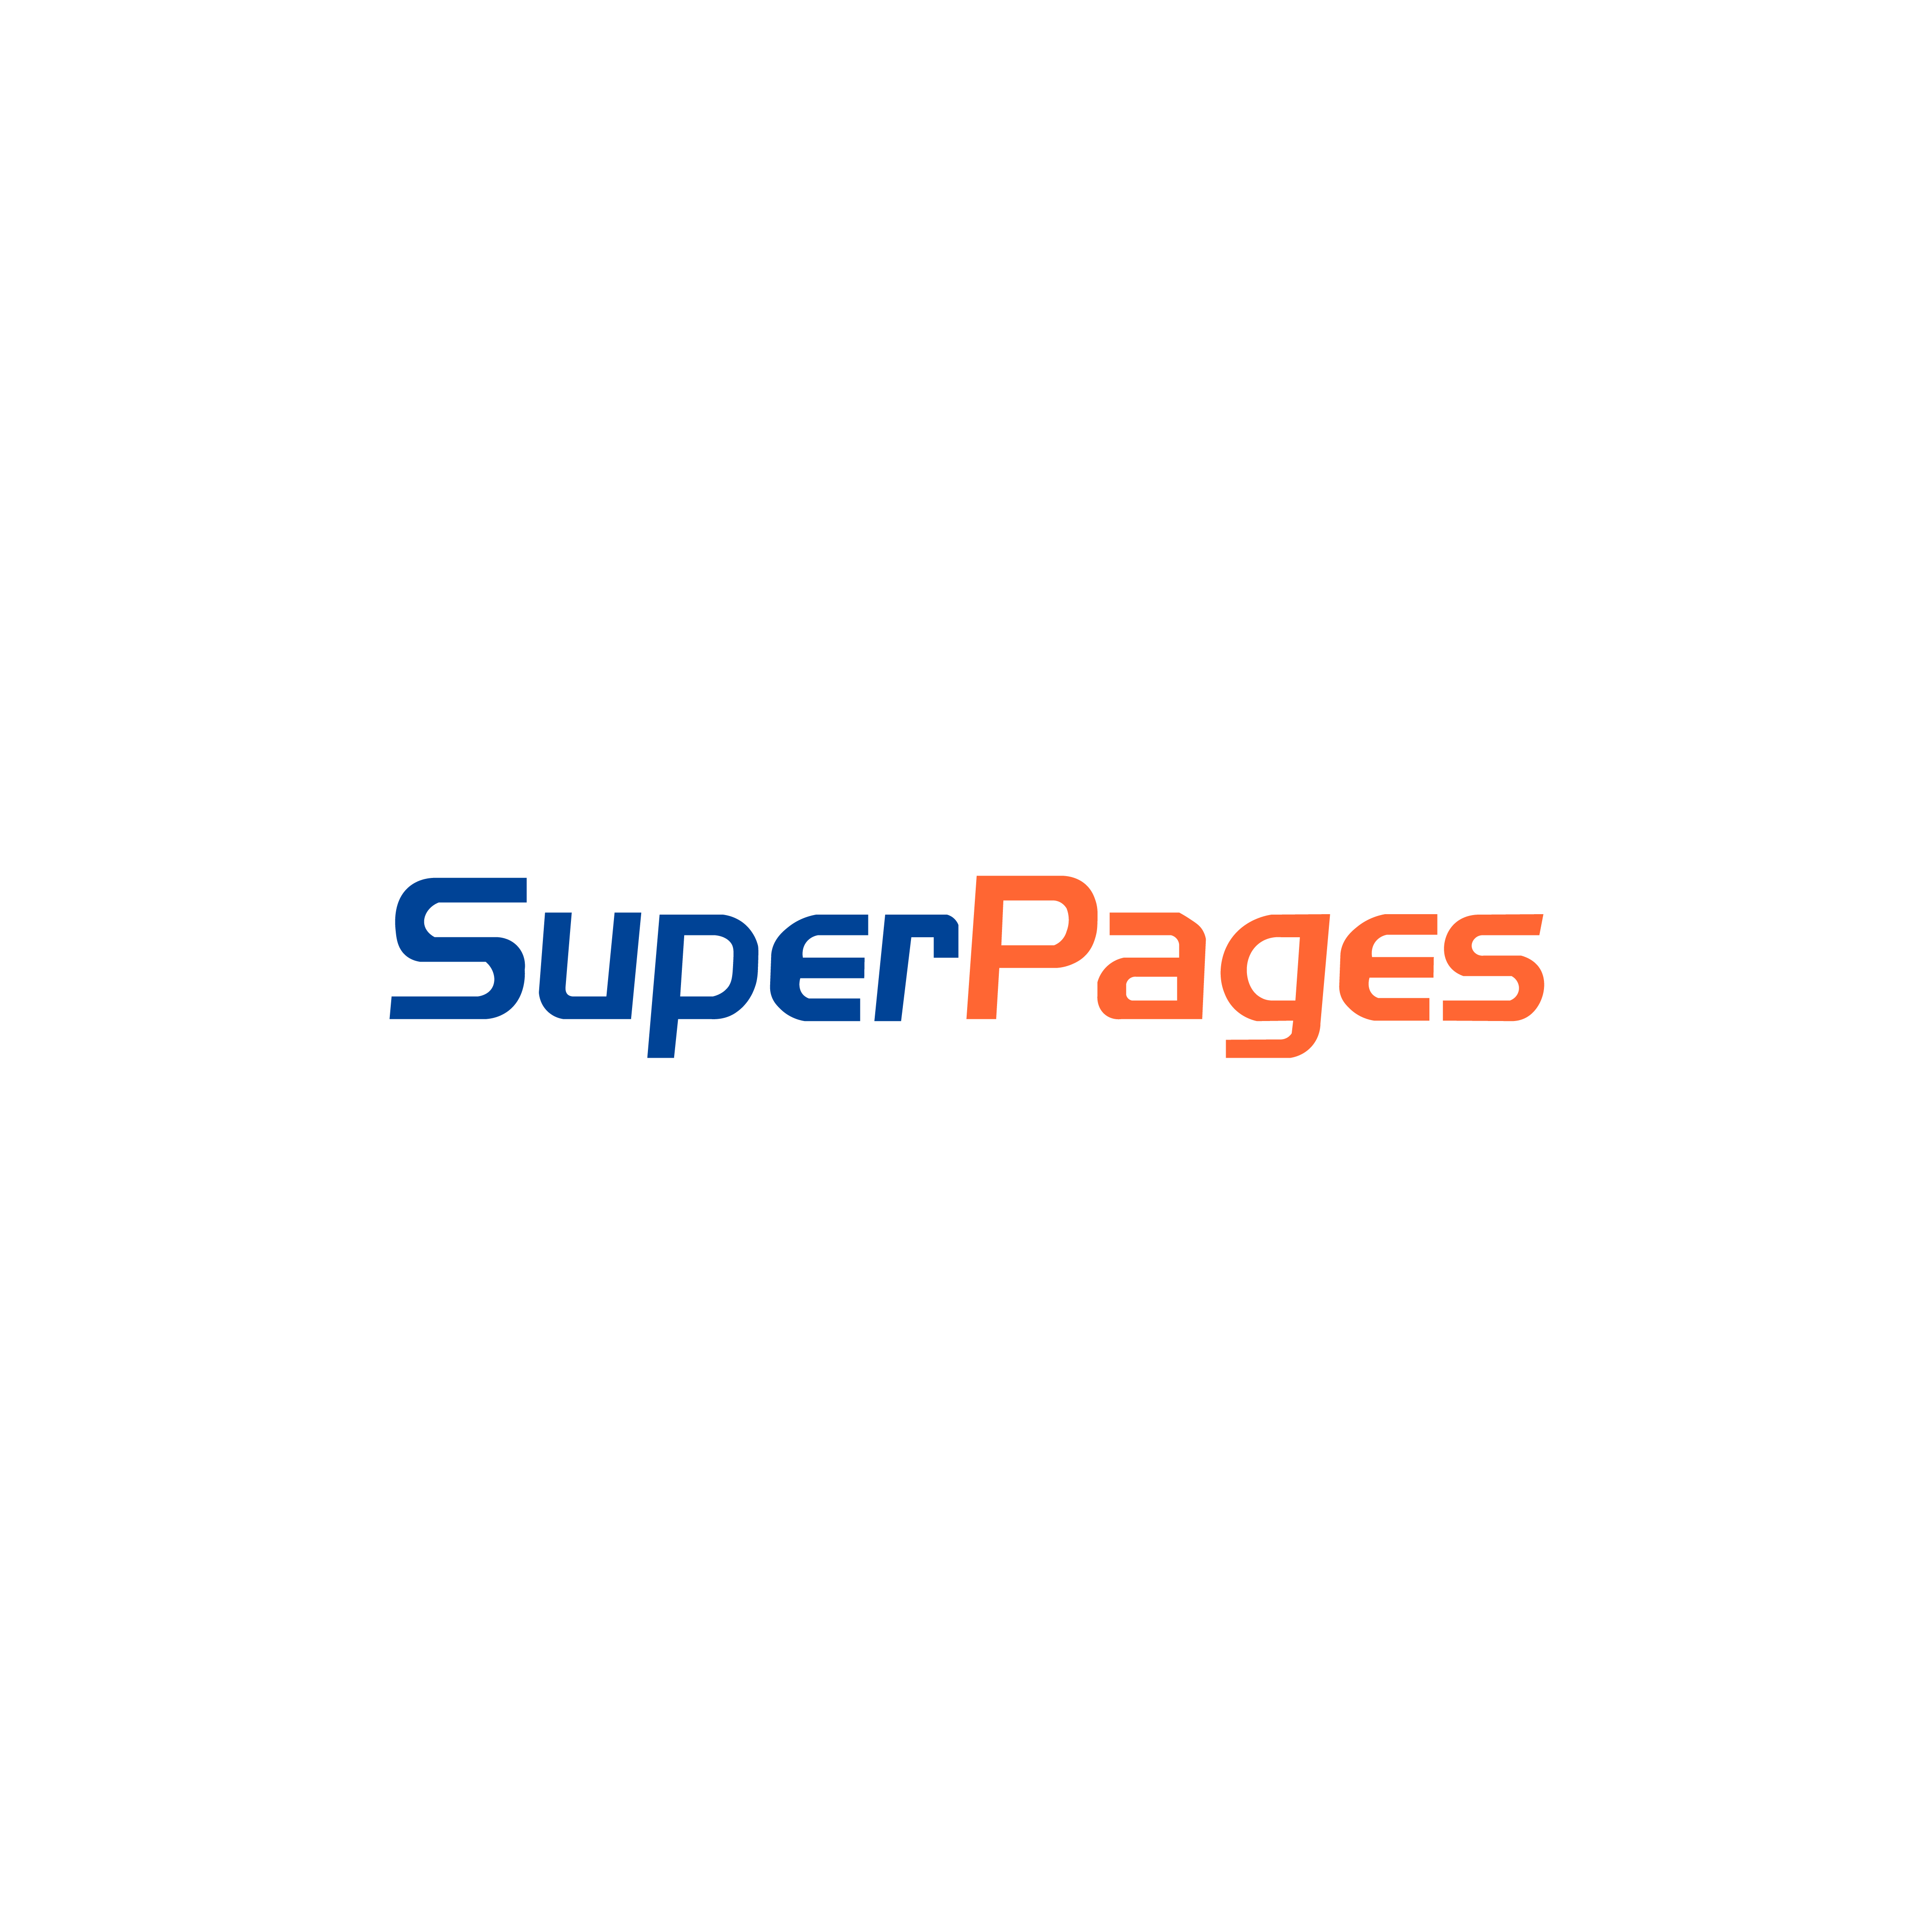 Sunshine Plumbers - Superpages